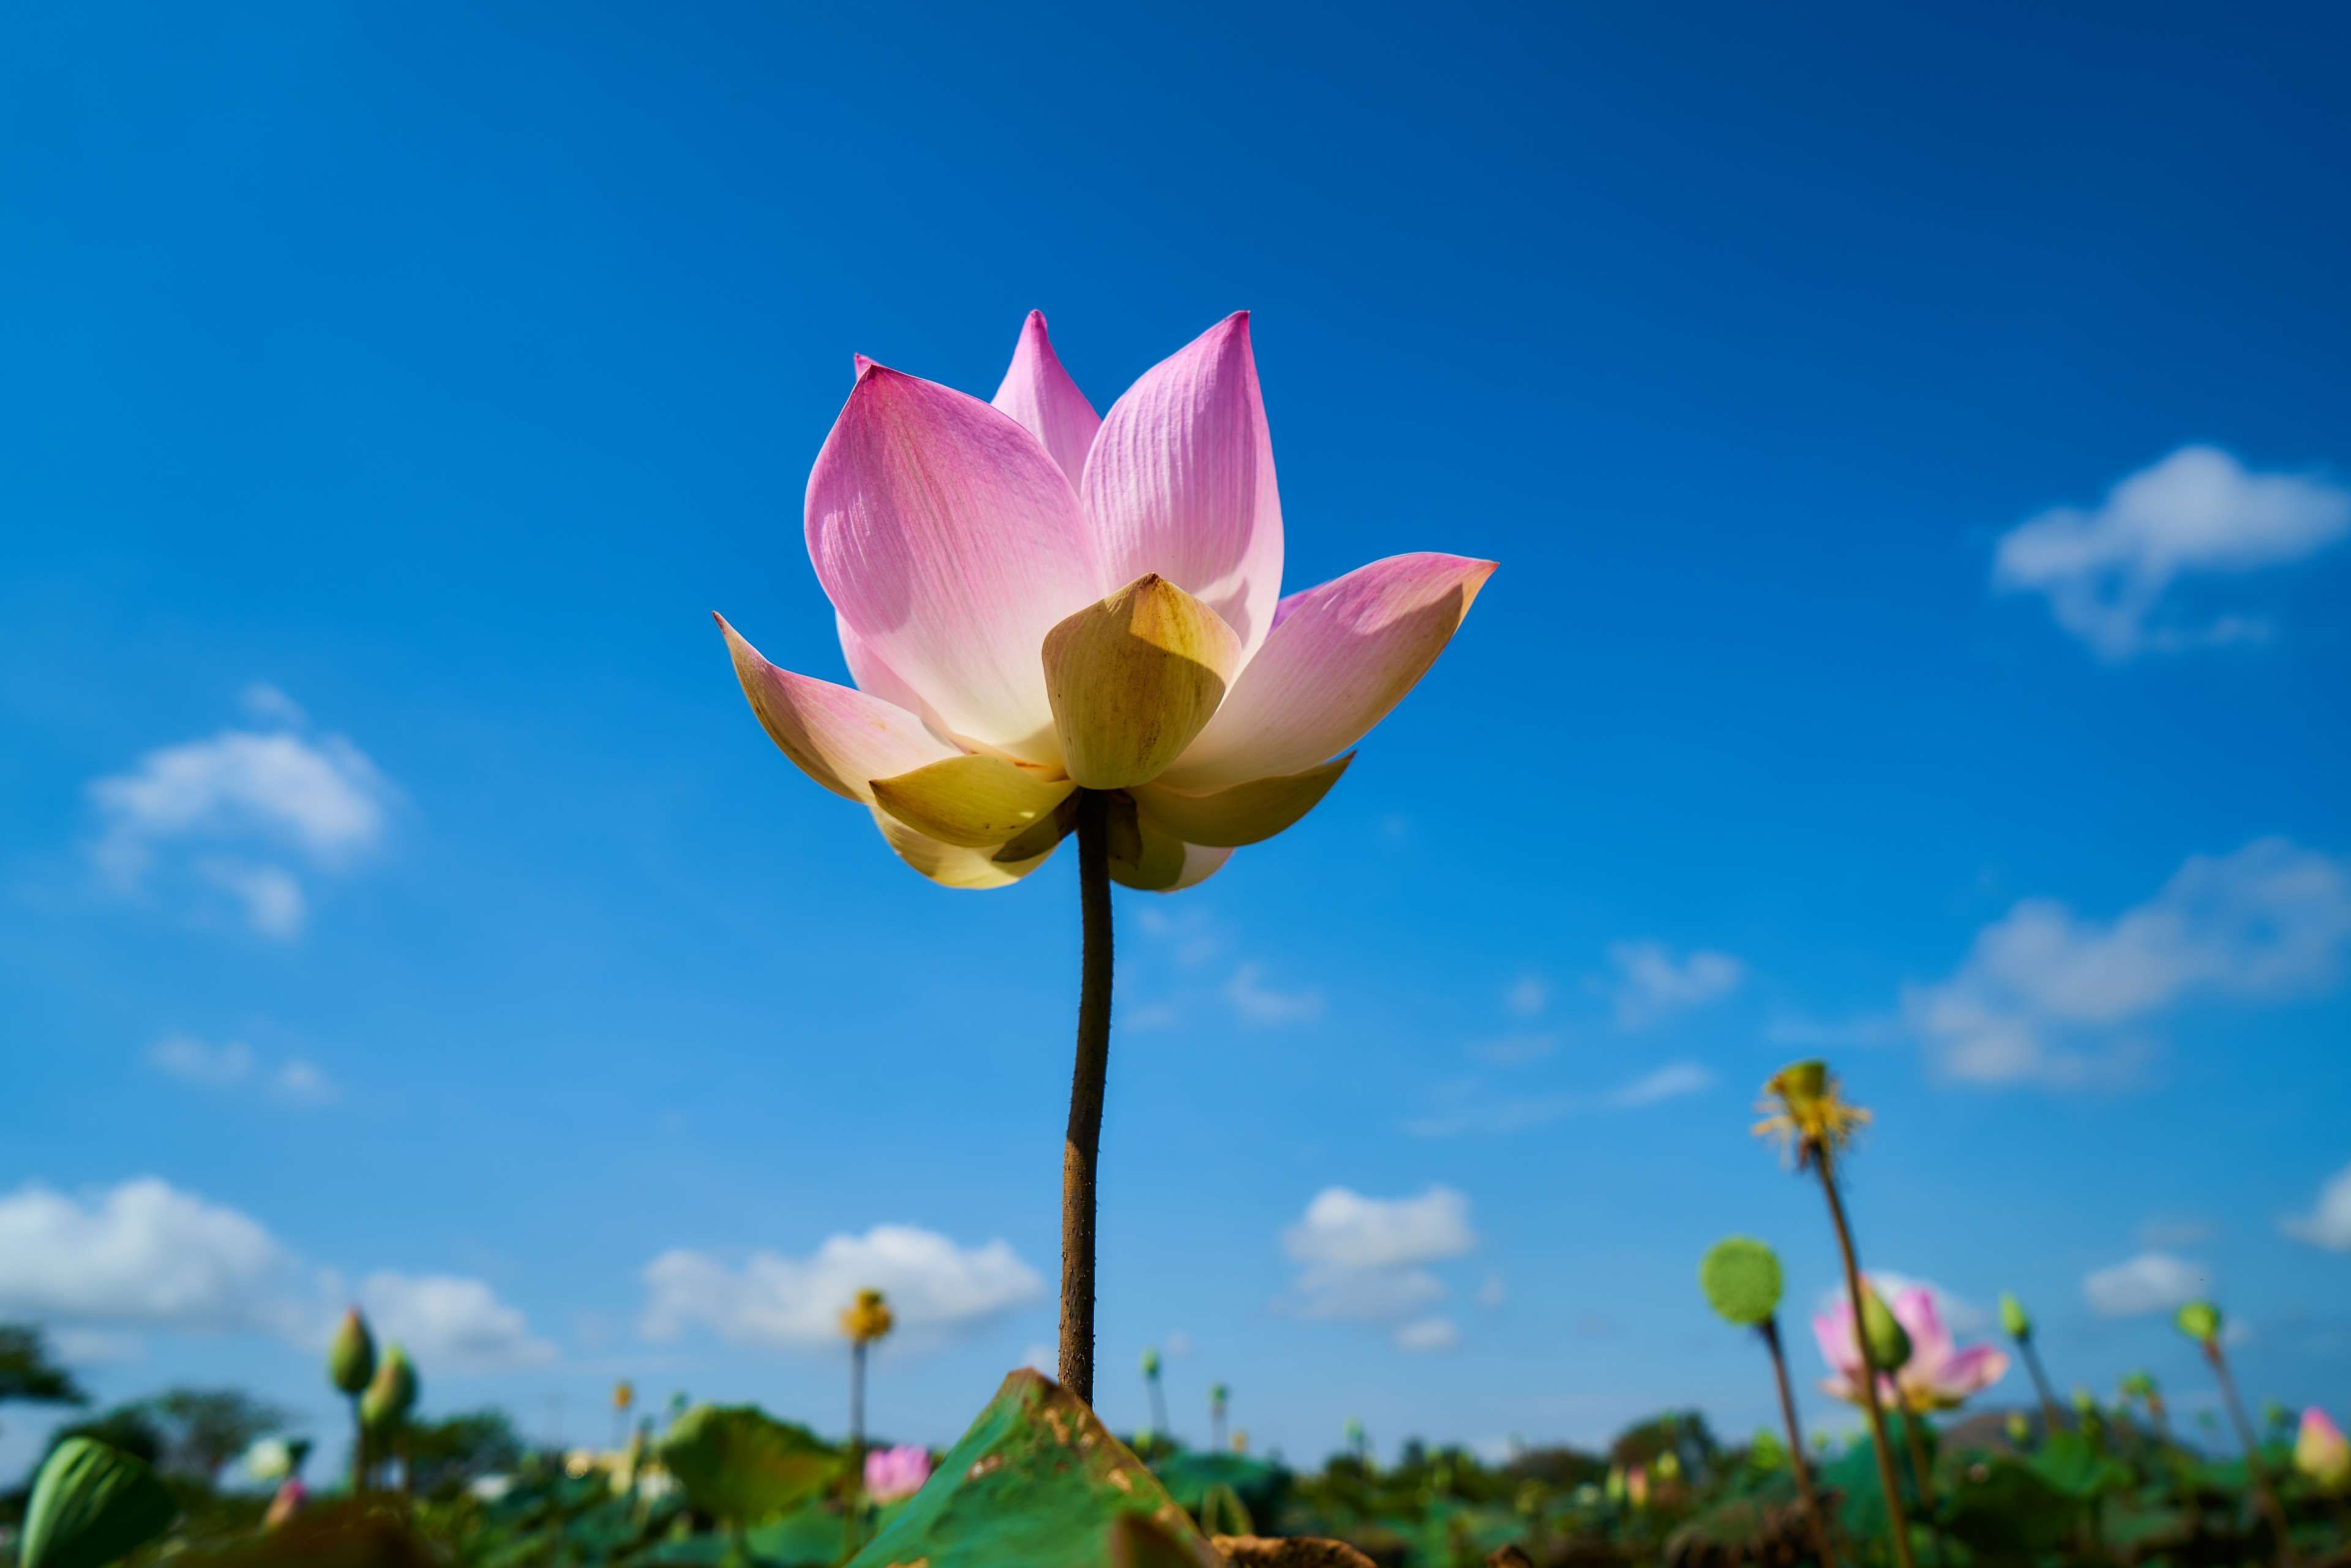 3840x2561 Beautiful Beauty Botanical Cloud Color Colors Flower Flower Picture Flowers Garden Landscape Lotus Macro Nature Pink Pink Flower Plant Season Sky Spring Spring Flowers Summer The Leaves Are 4k Wallpaper